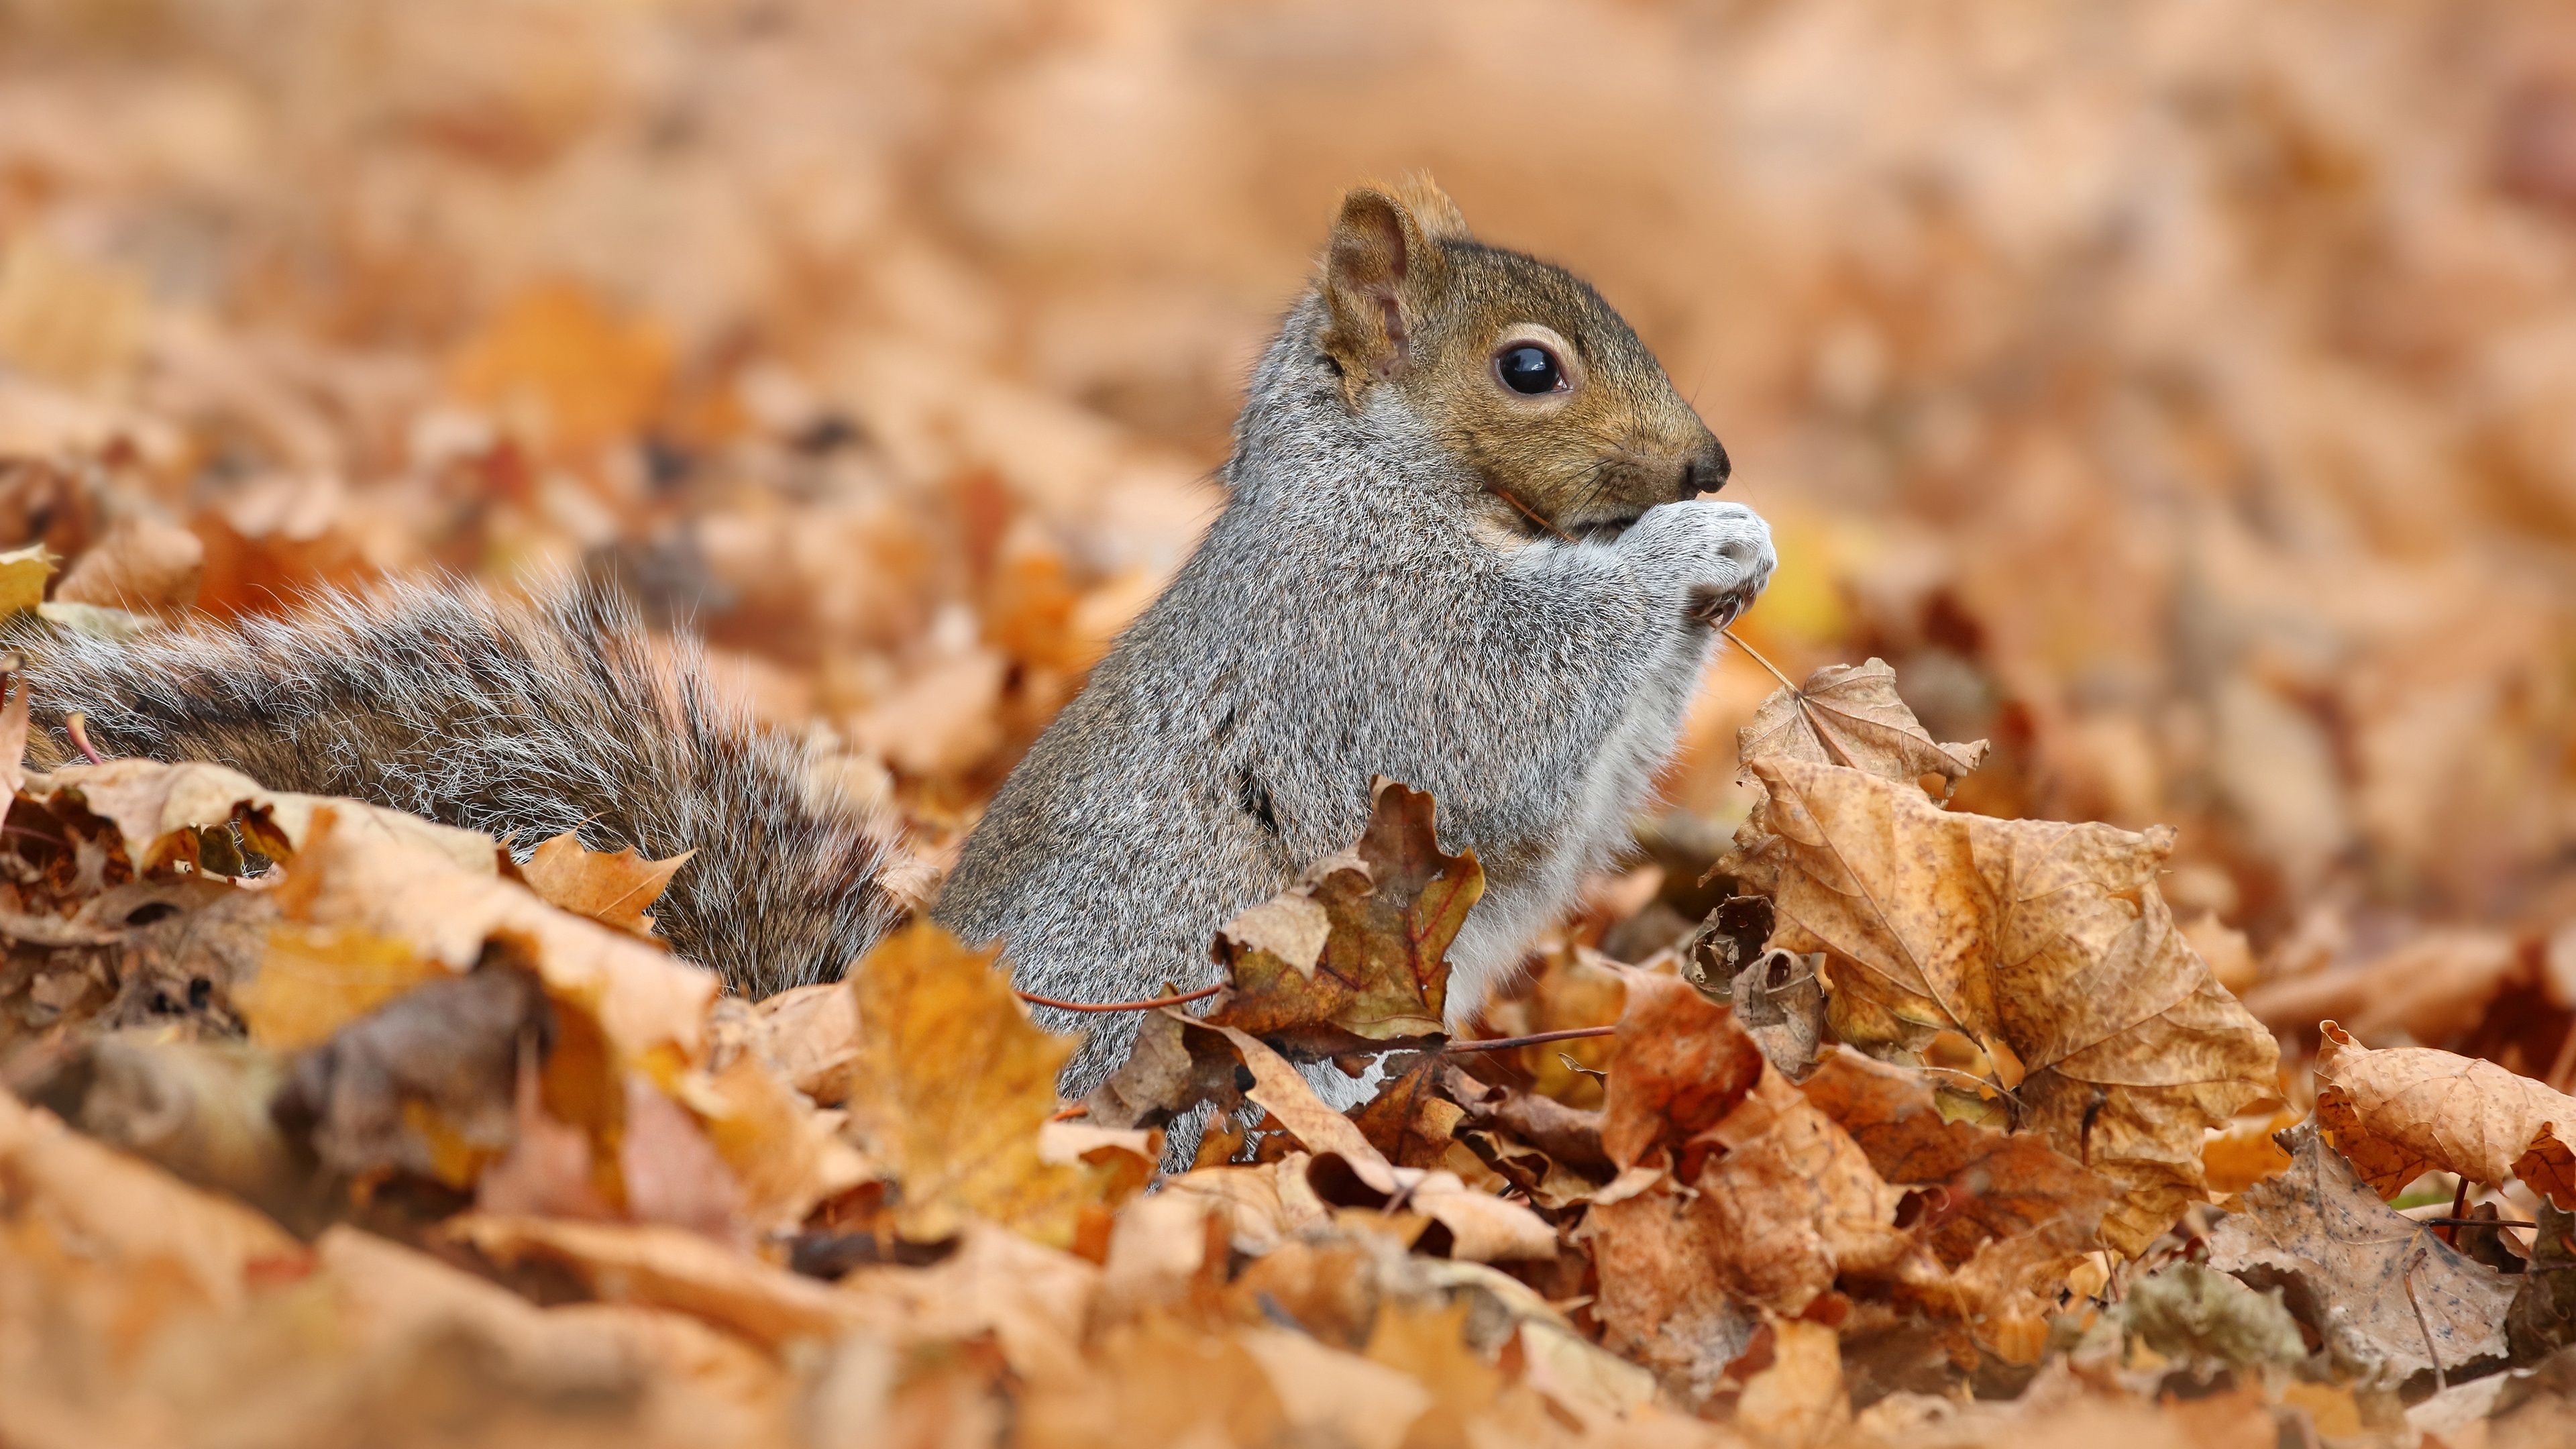 Wallpaper Squirrel and maple leaves, autumn 3840x2160 UHD 4K Picture, Image